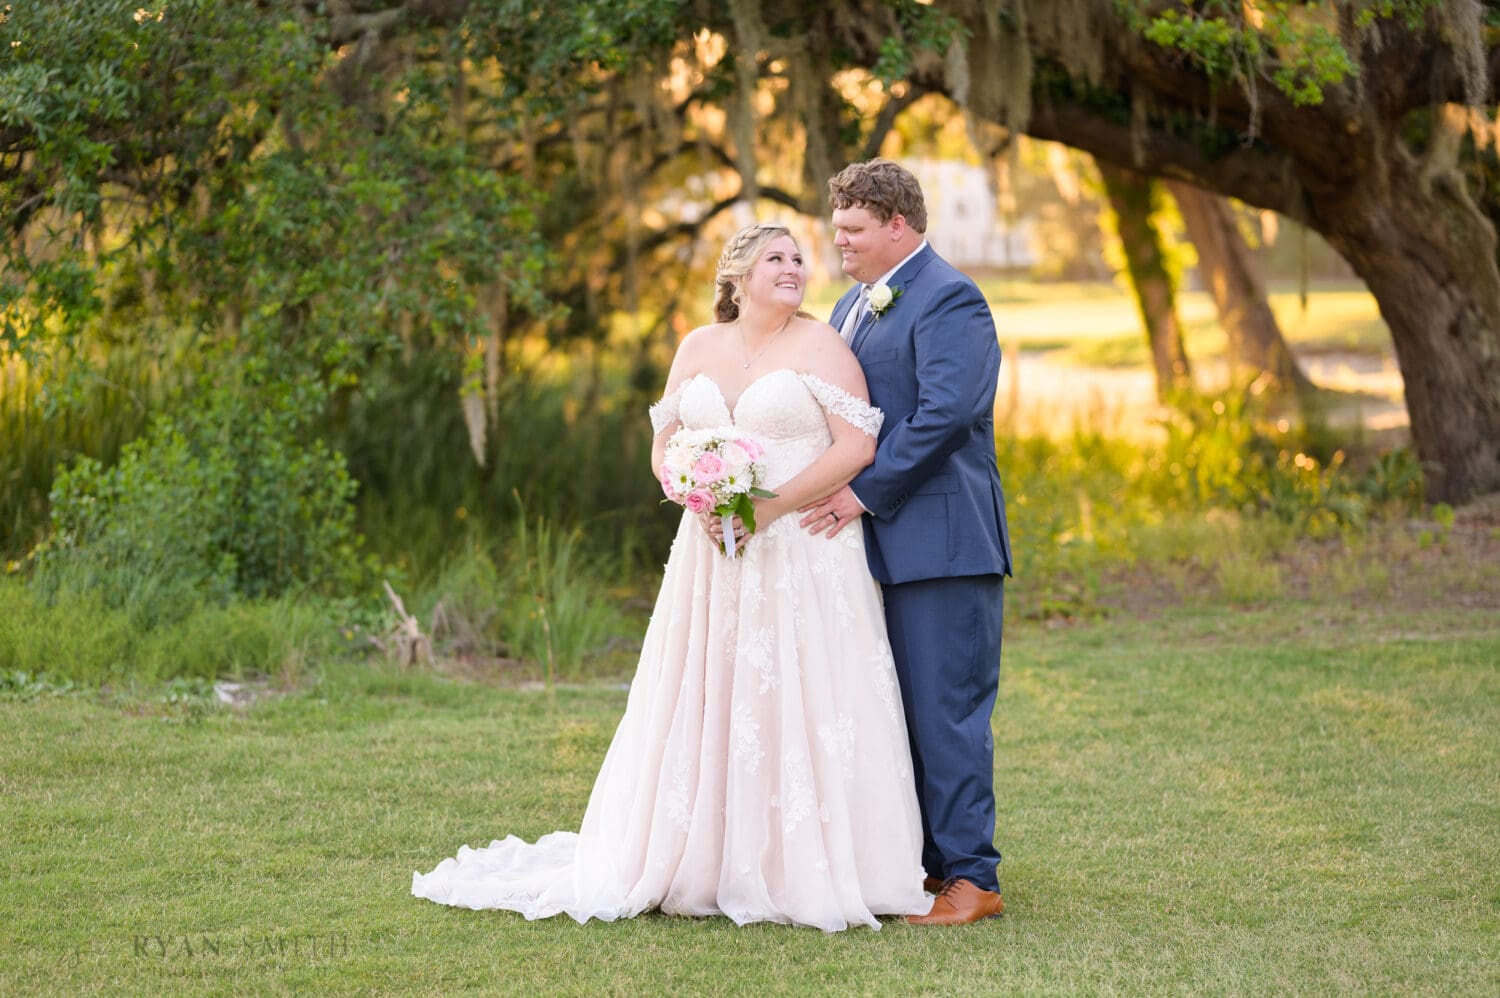 Groom hugging bride from behind looking into each others eyes - Pawleys Plantation